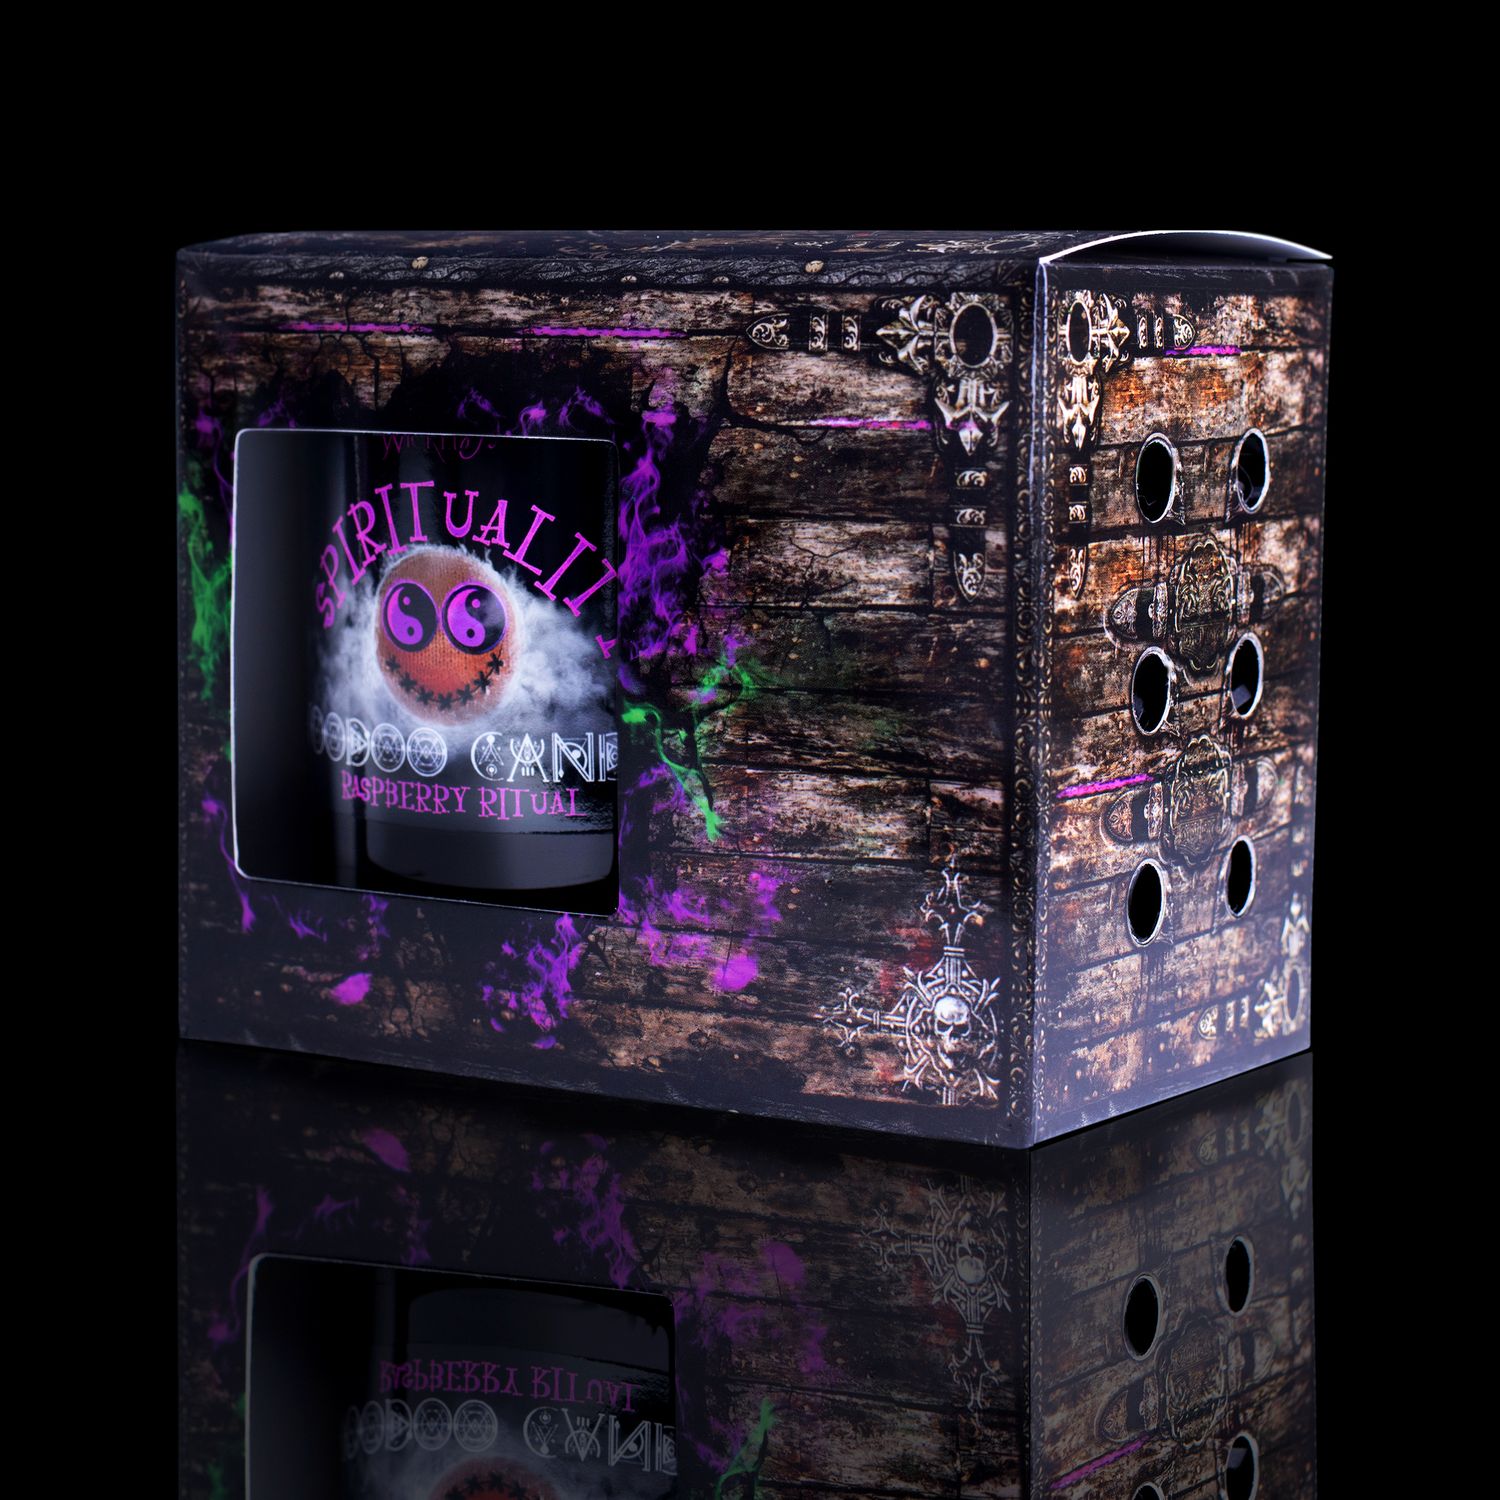  Side View Of The Fabulously Haunting Voodoo Spirituality Spell Candle. Naturally Wicked Voodoo Spirituality Candle Displayed In A Gift Box. The Candle Features Plant-Based Smooth Purple Wax, A Wood Wick, Purple Voodoo Doll And A Beautiful Purple Amethyst Crystal Wand.